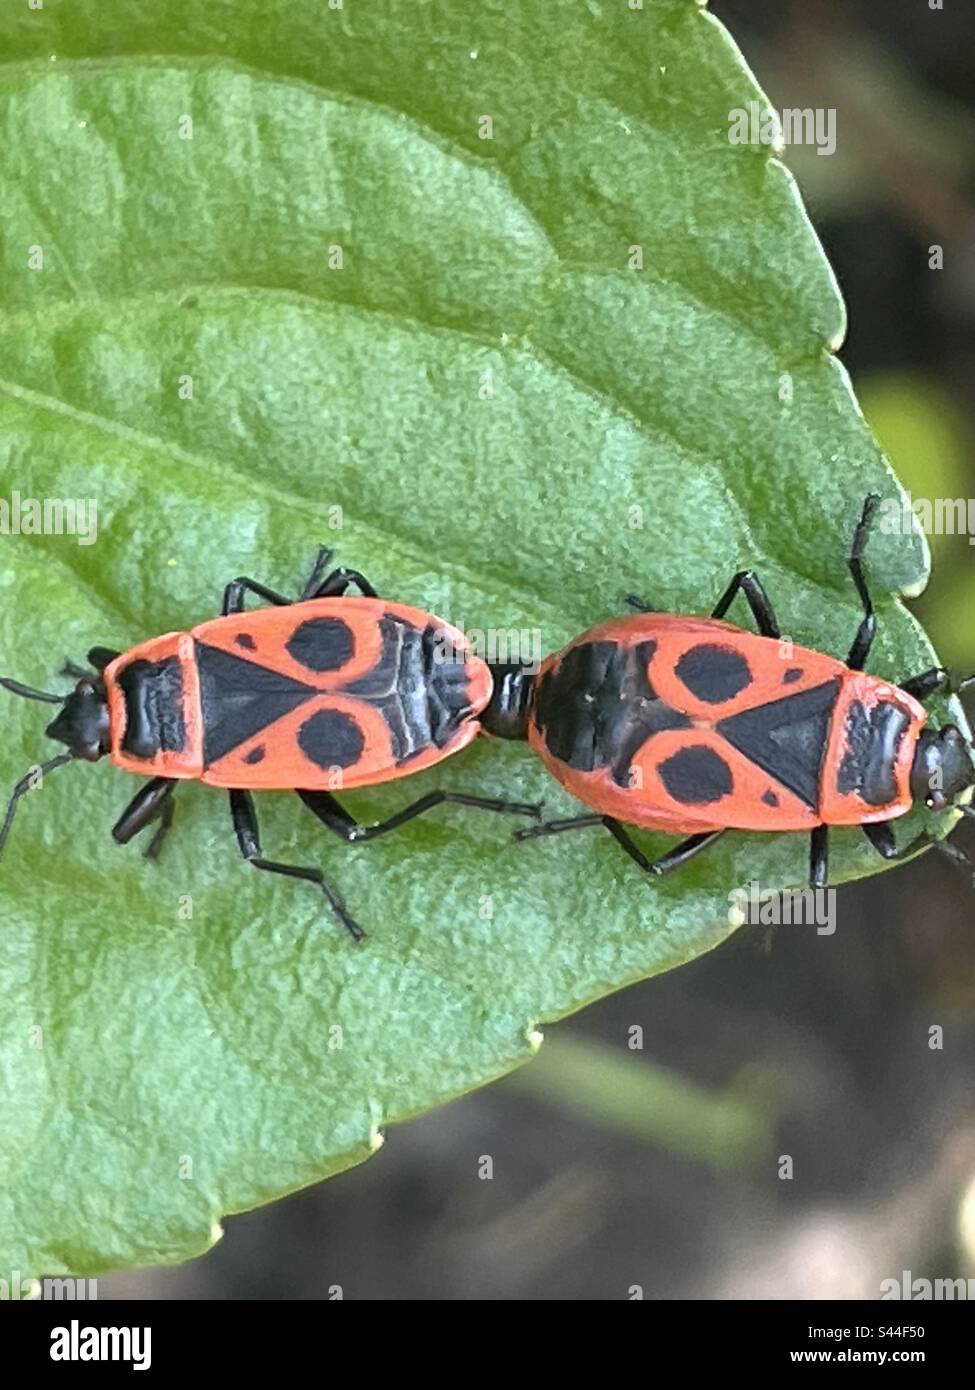 Close up of unusual but striking insects on a green leaf Stock Photo